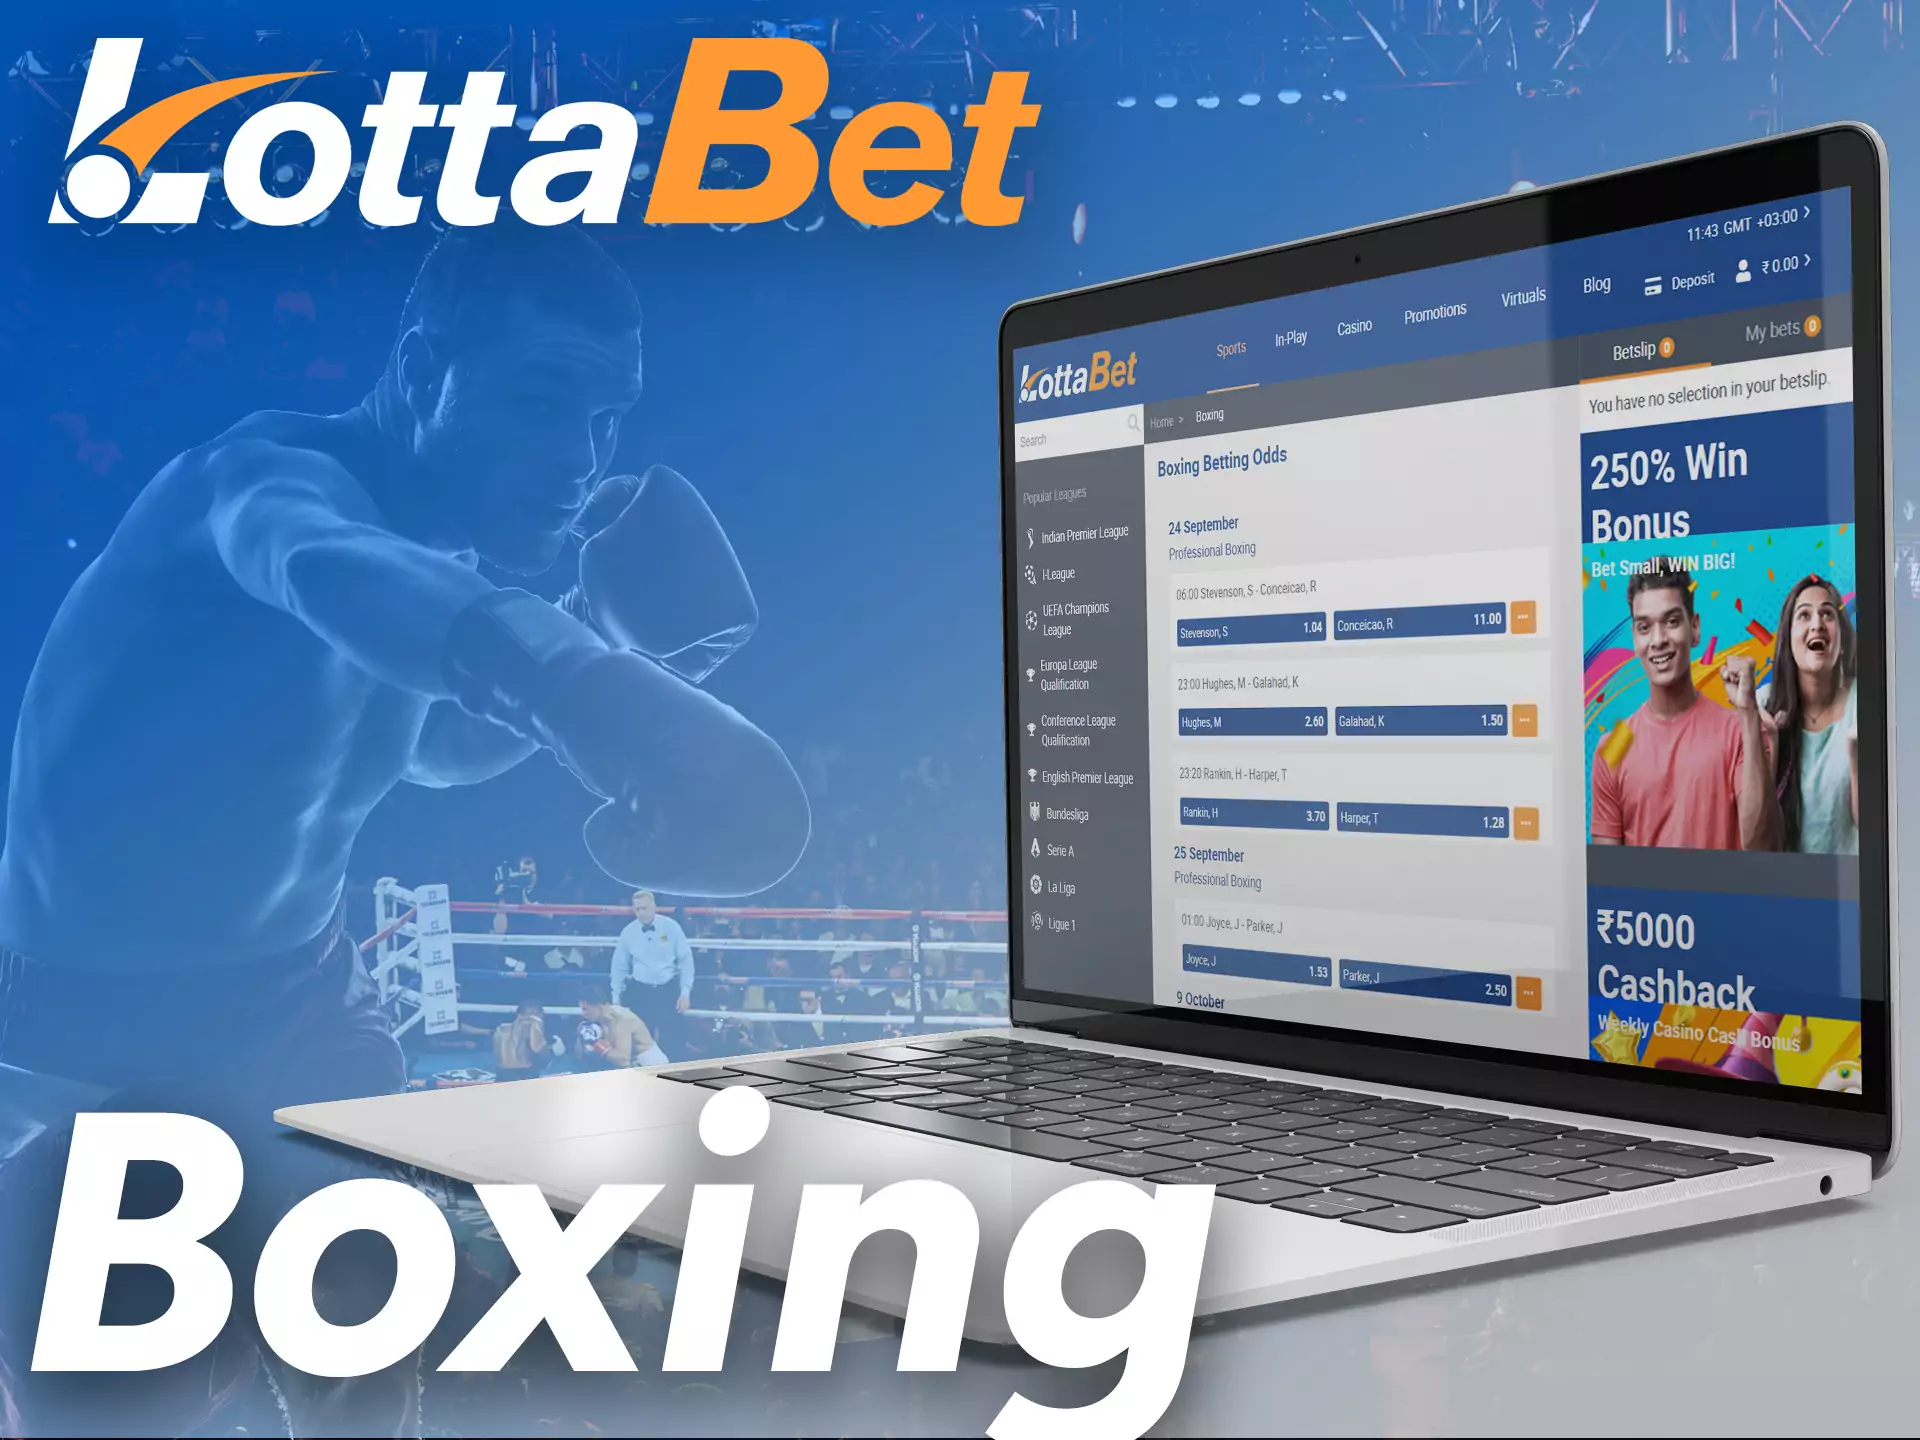 On Lottabet you always can bet on boxing fights.